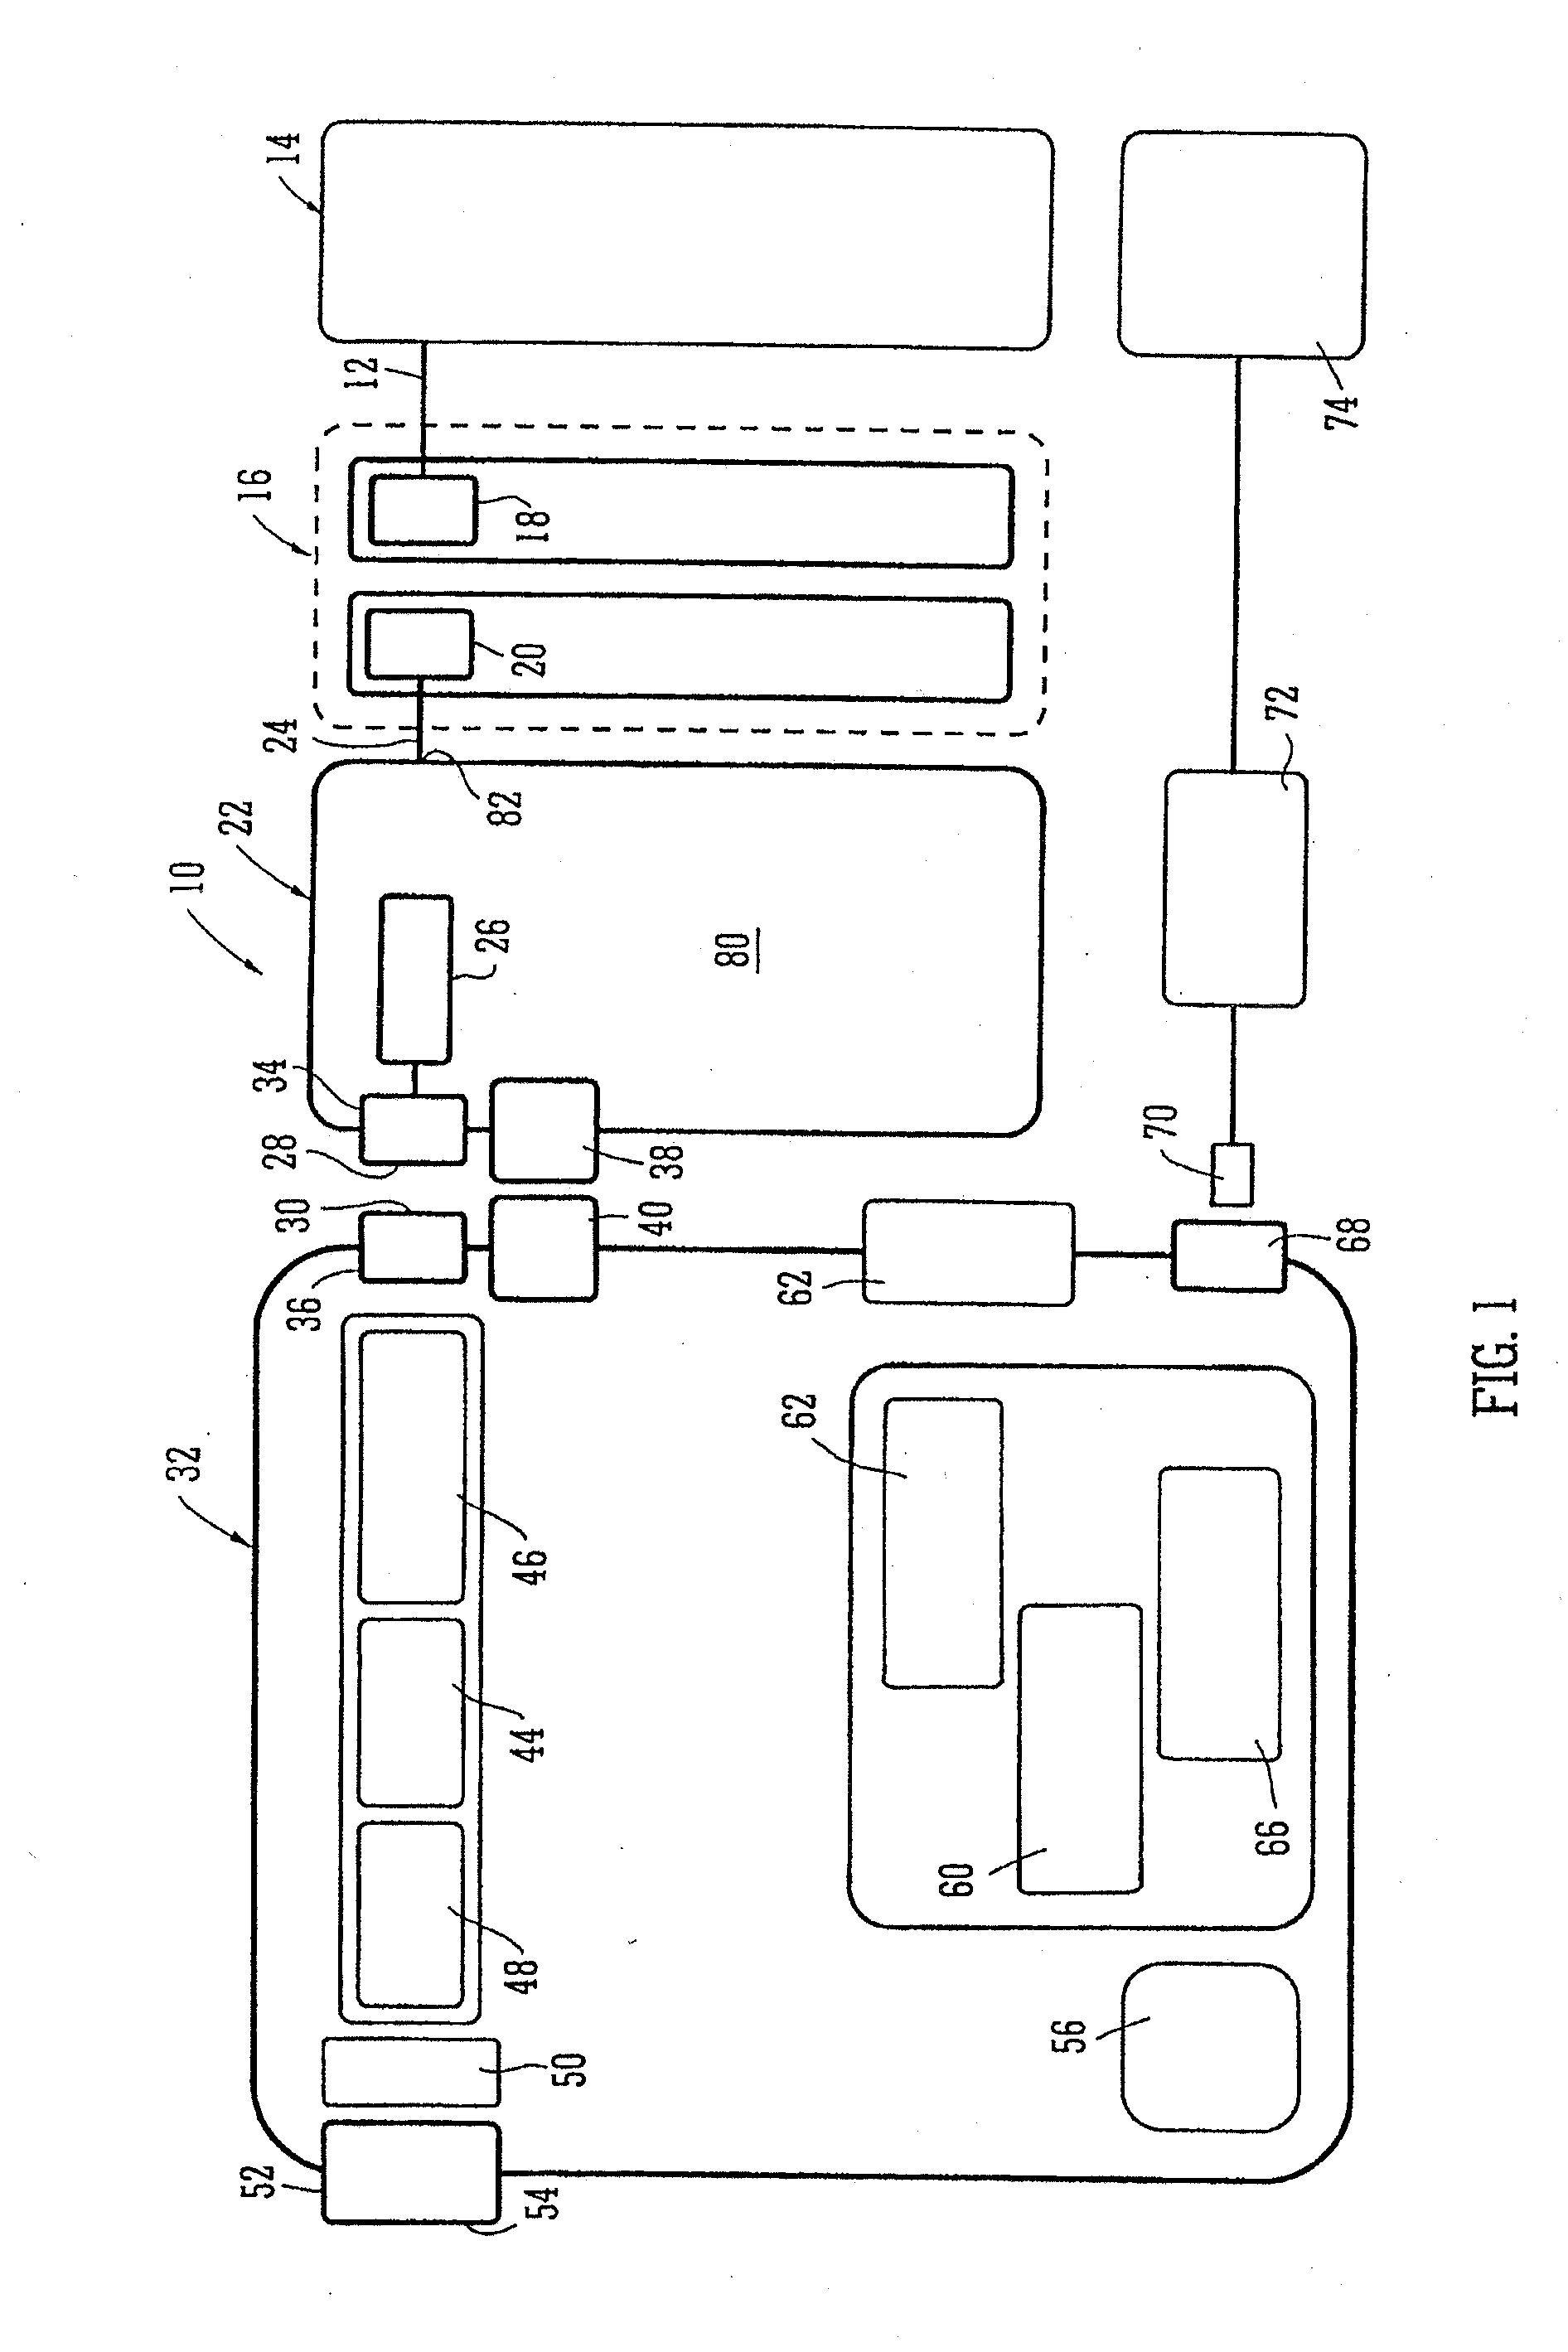 Systems and methods for controlling operation of negative pressure wound therapy apparatus